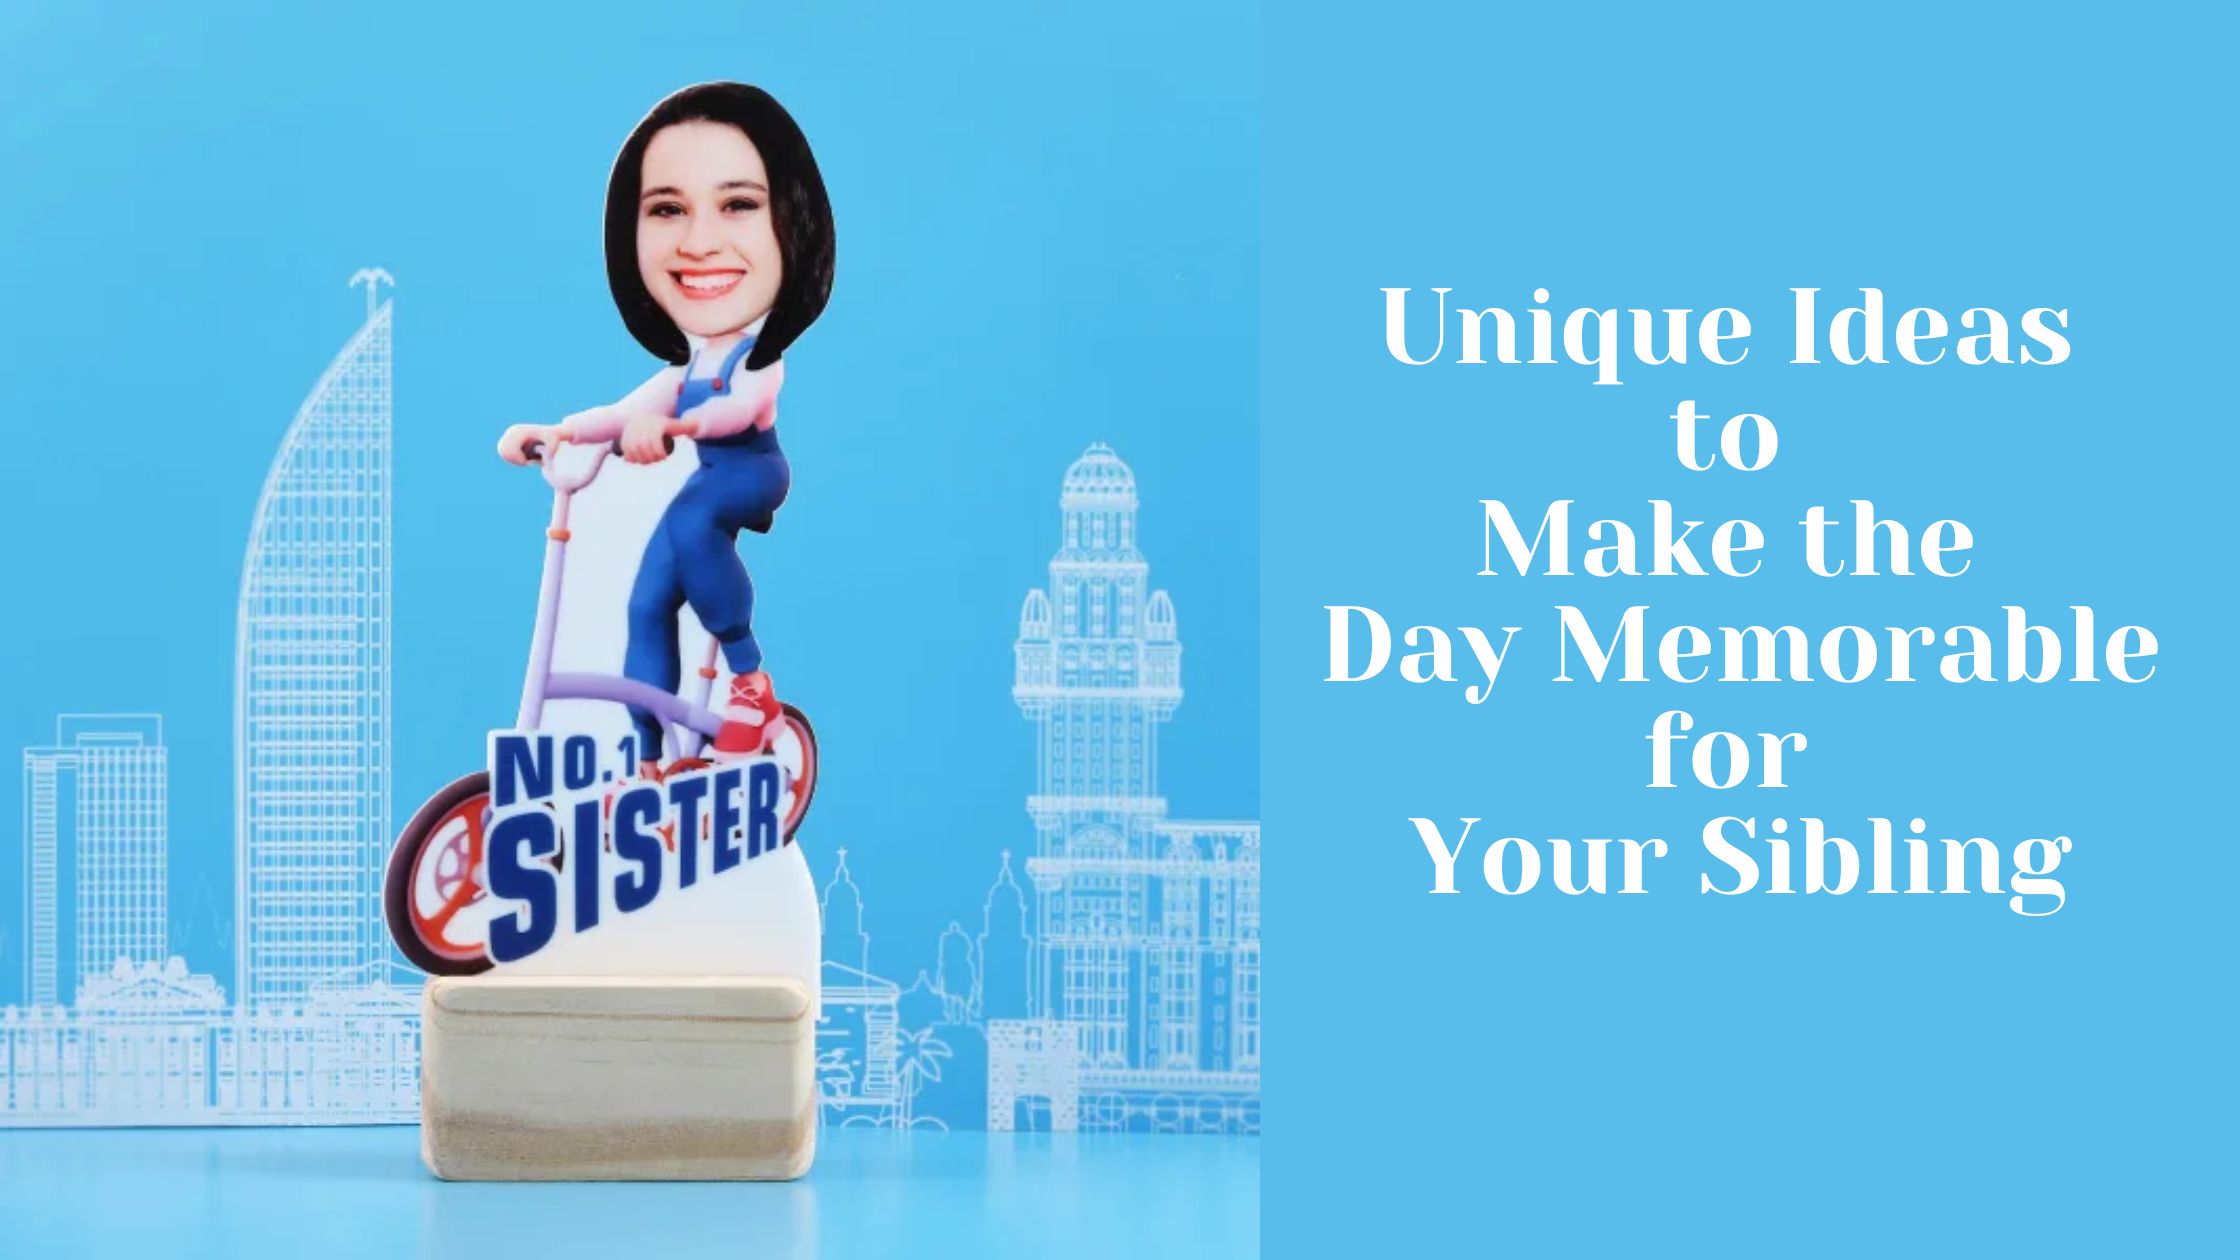 Unique Ideas to Make the Day Memorable for Your Sibling